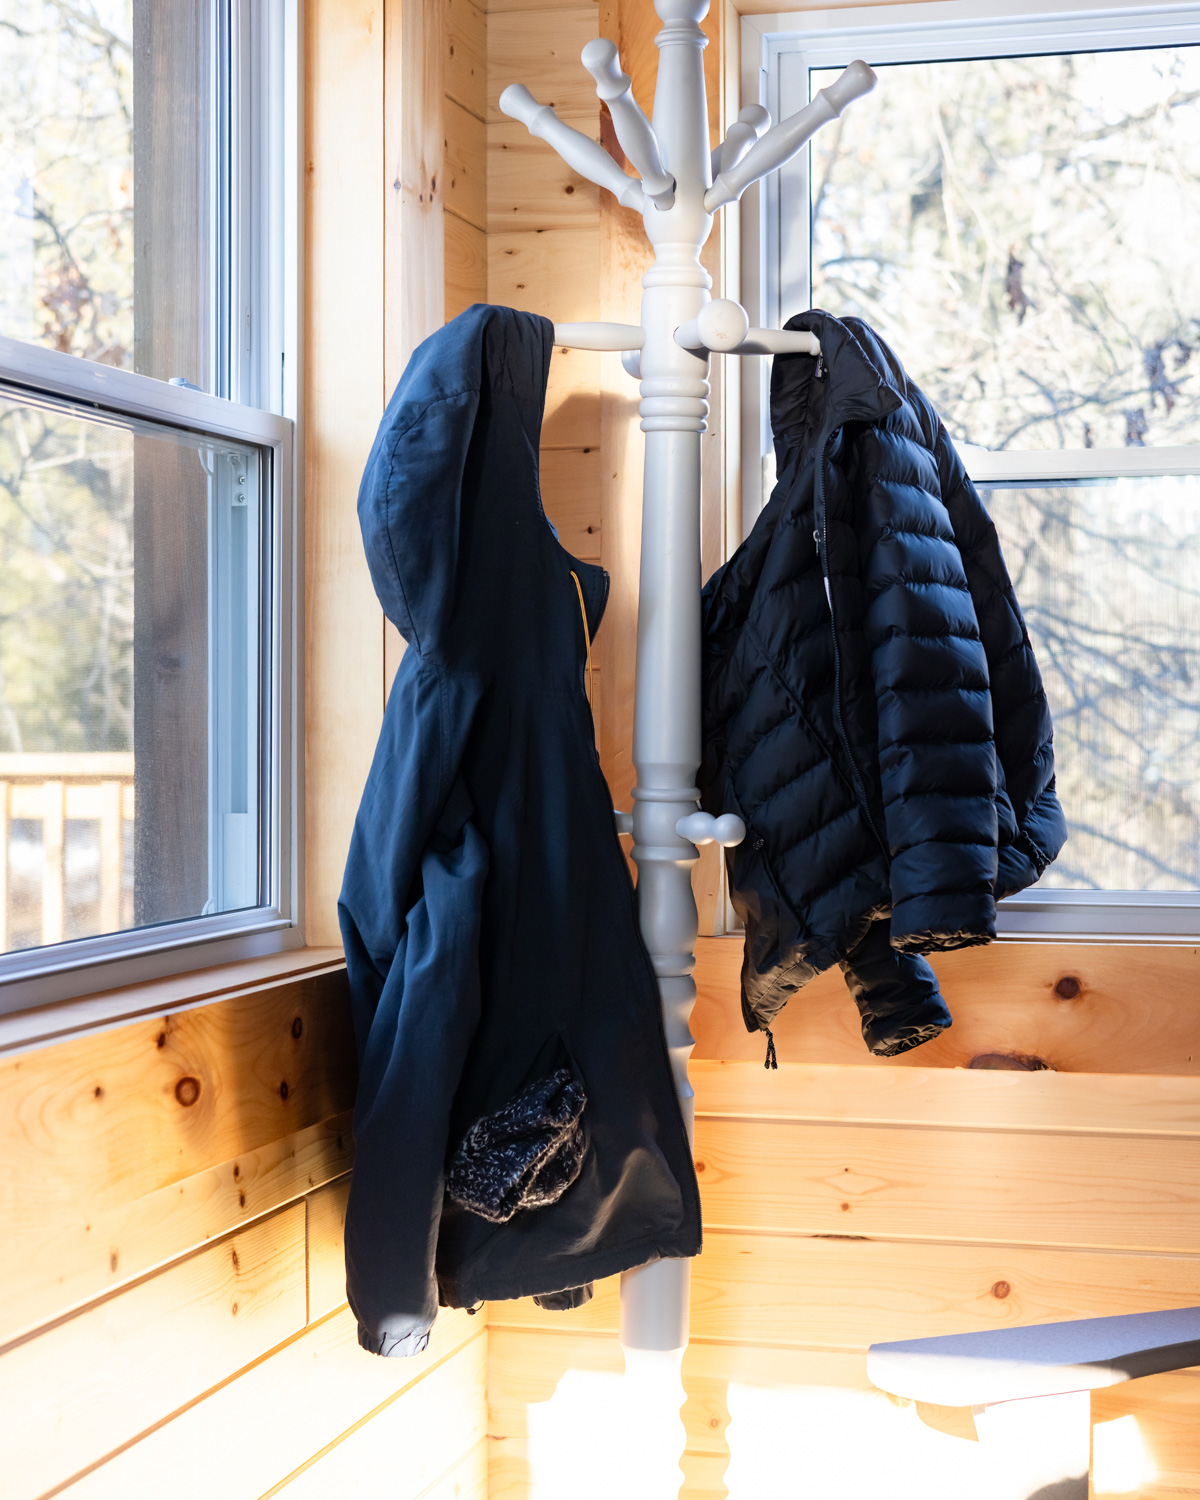 A place to hang coats in the cabin.